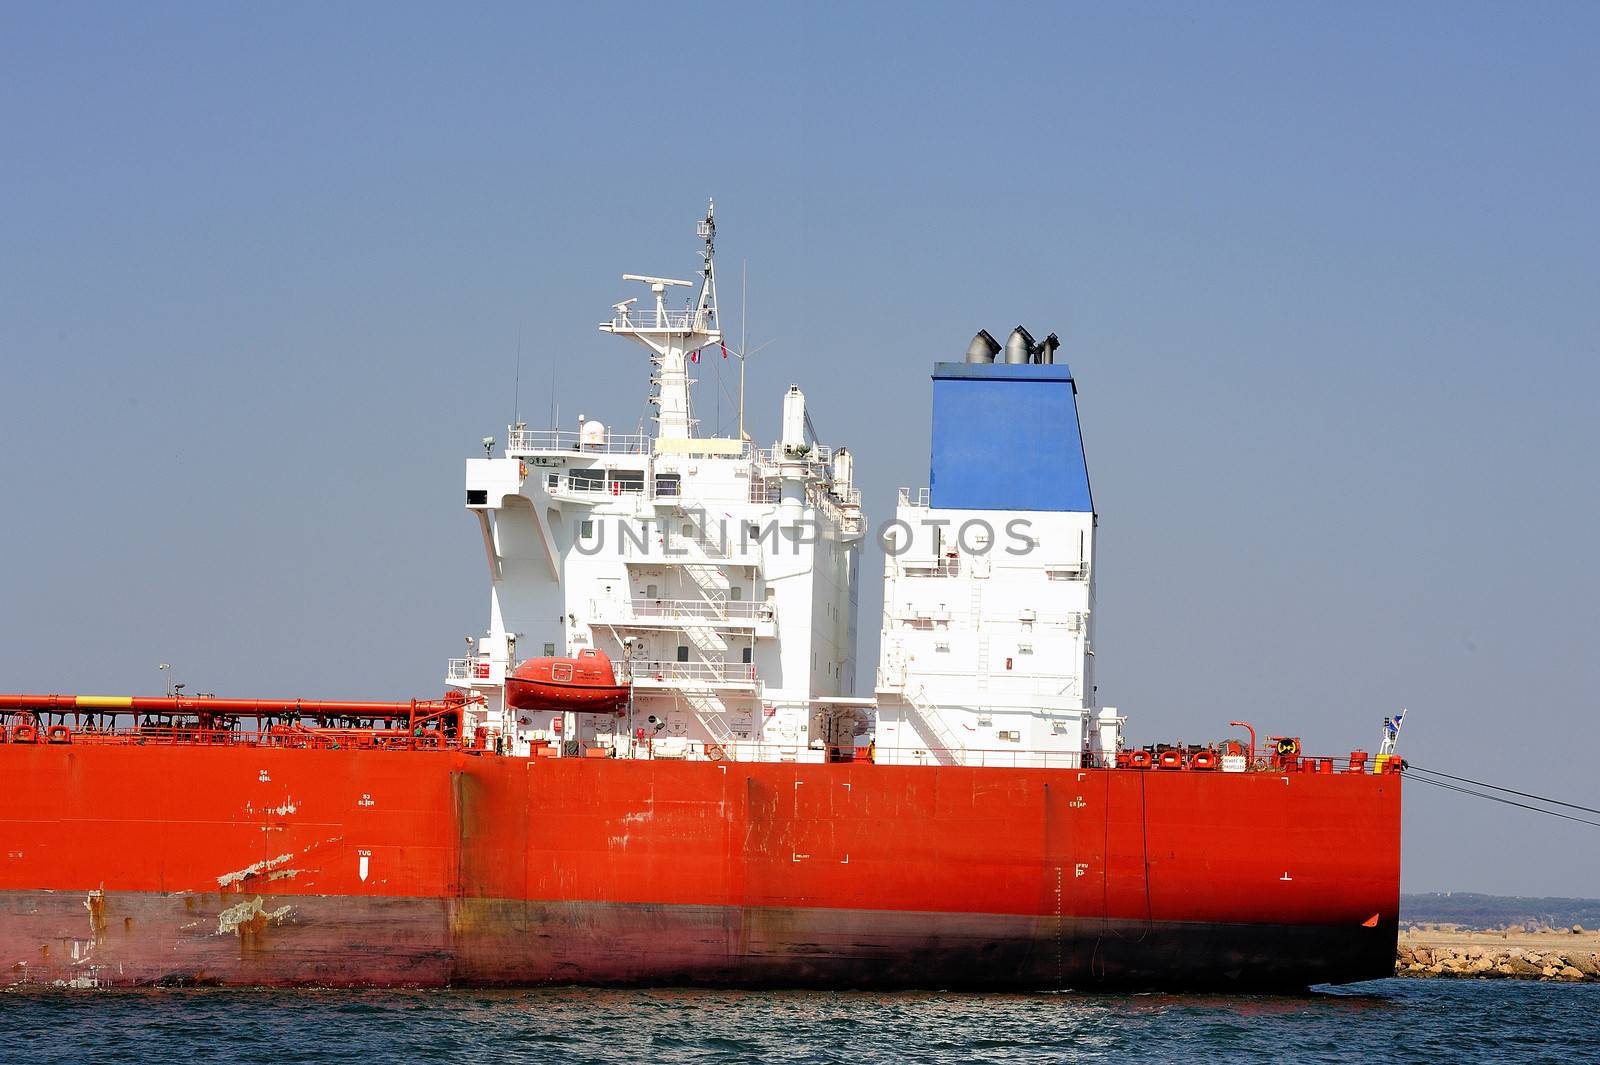 quay tanker to discharge its cargo in France with the wearing of Fos-sur-Mer beside Marseille